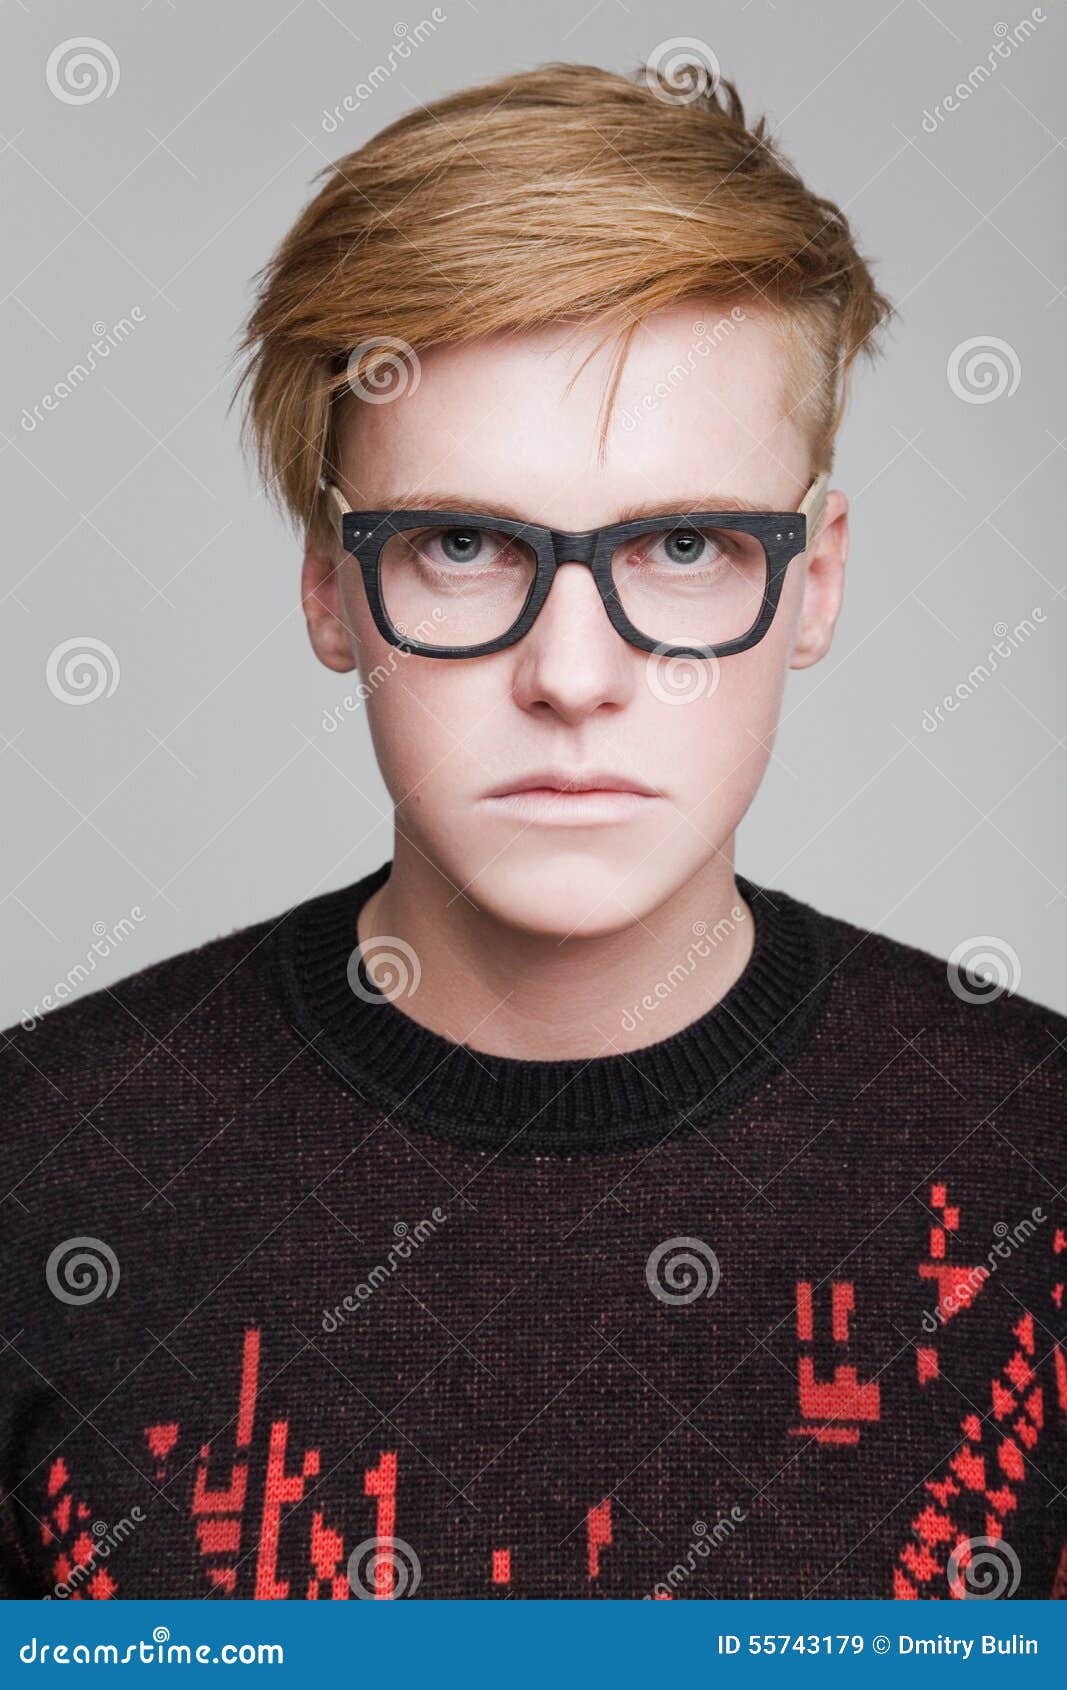 Red-hair boy in glasses stock image. Image of student - 55743179